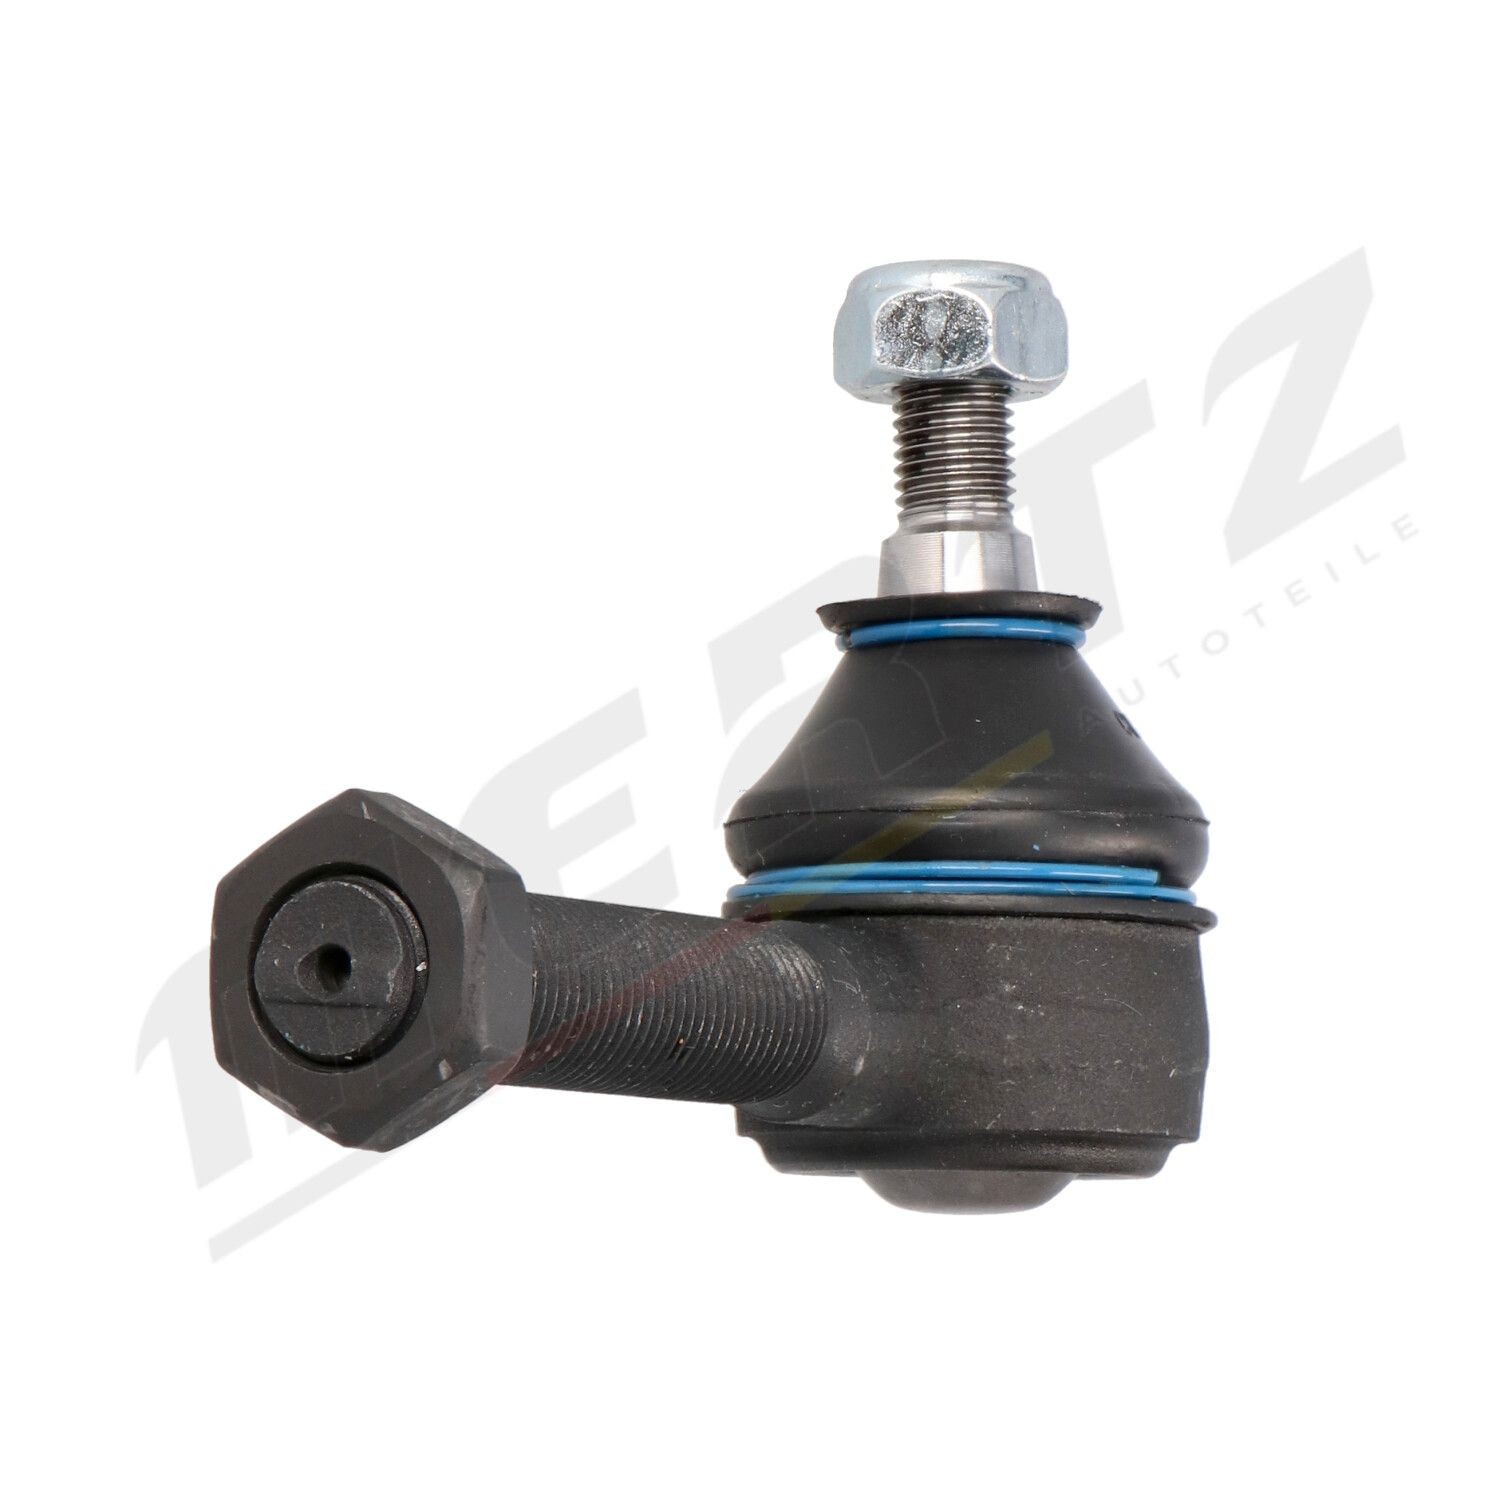 MERTZ M-S0375 Track rod end M14x1,5, M10x1,25 mm, Front Axle Left, Front Axle Right, with self-locking nut